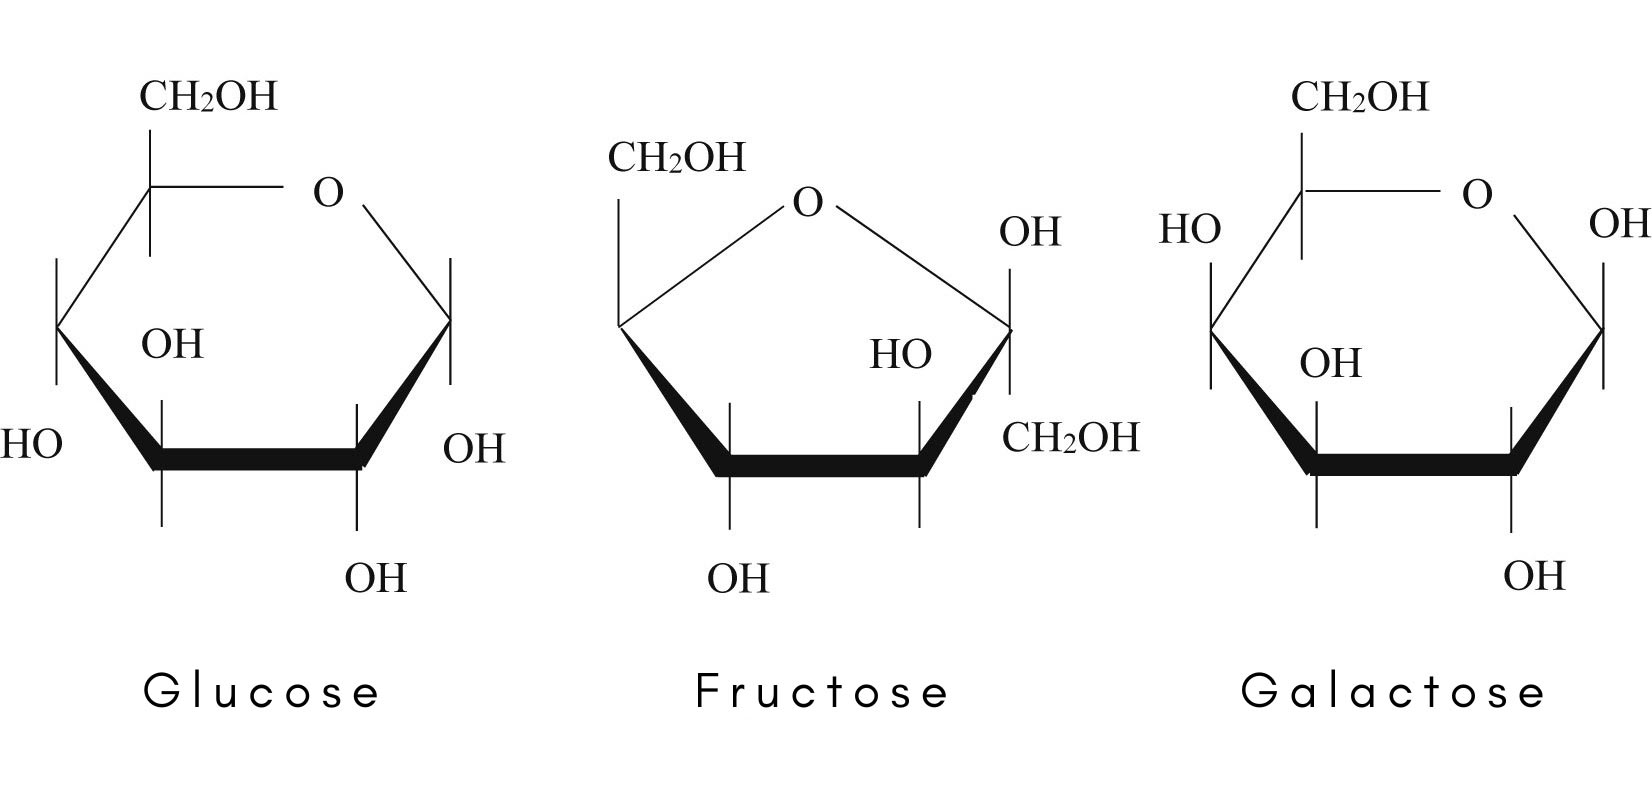 Comparison of the molecular structures of glucose, fructose, and galactose.